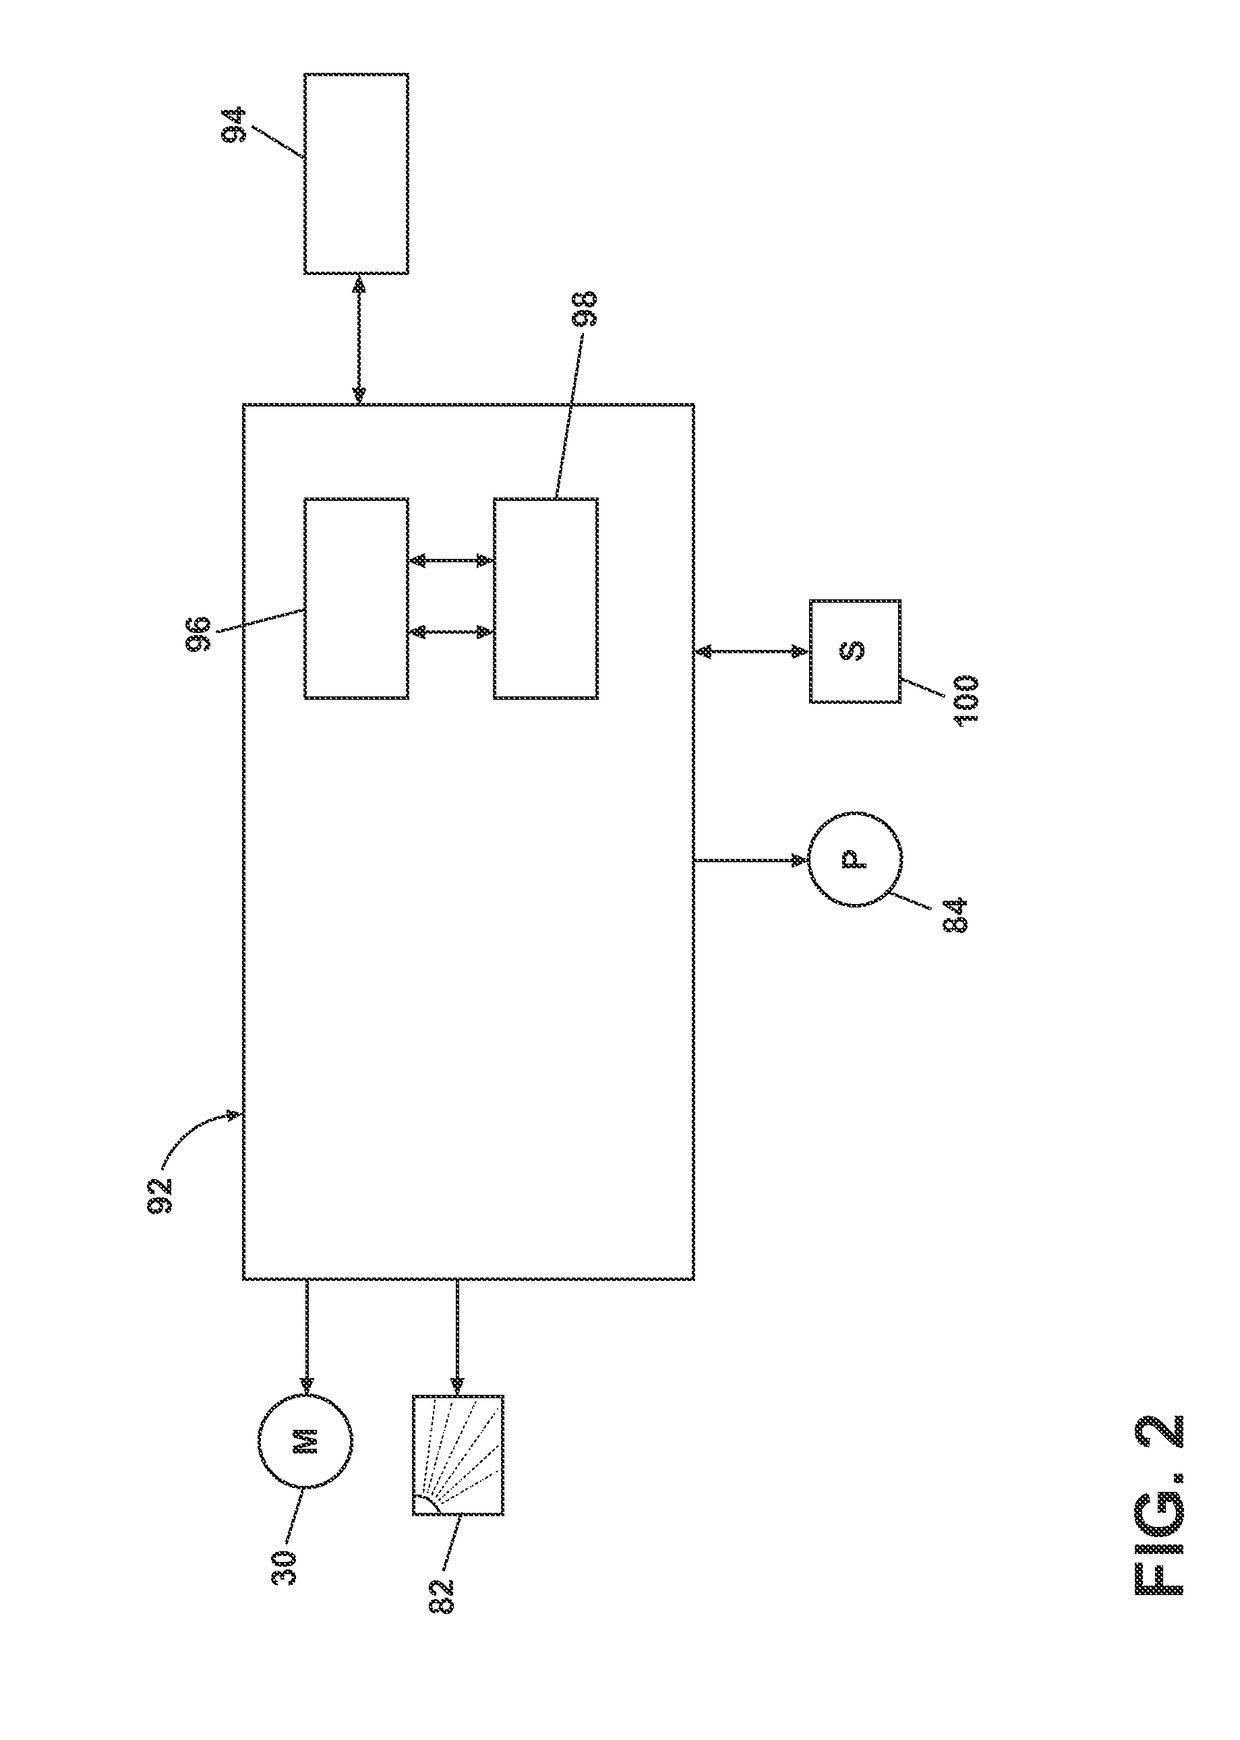 Laundry treating appliance with a static tub and a water trap vapor seal